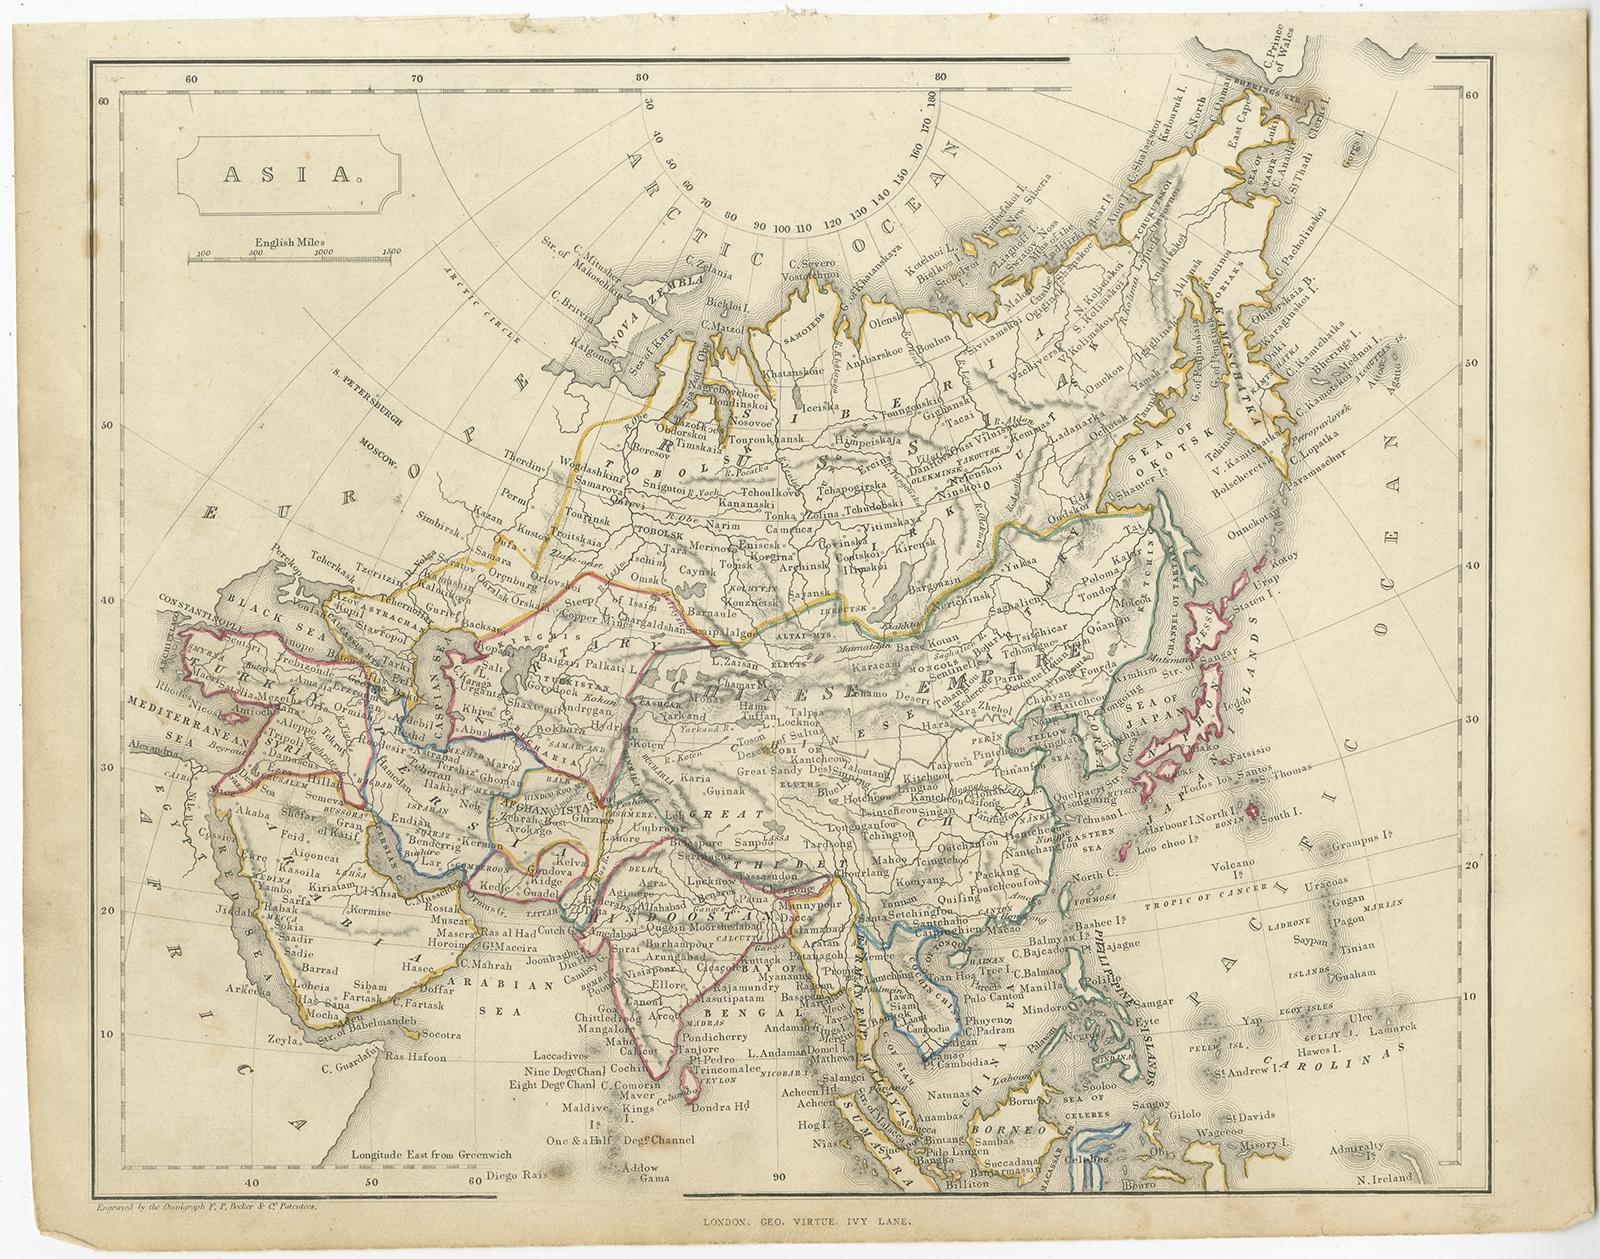 Antique map titled 'Asia'. Steel engraved map of Asia by F. P. Becker & Co. 

Artists and Engravers: Engraved by F.P. Becker & Co. Published in London.

Condition: Very good, general age-related toning. Please study image carefully.
Date: